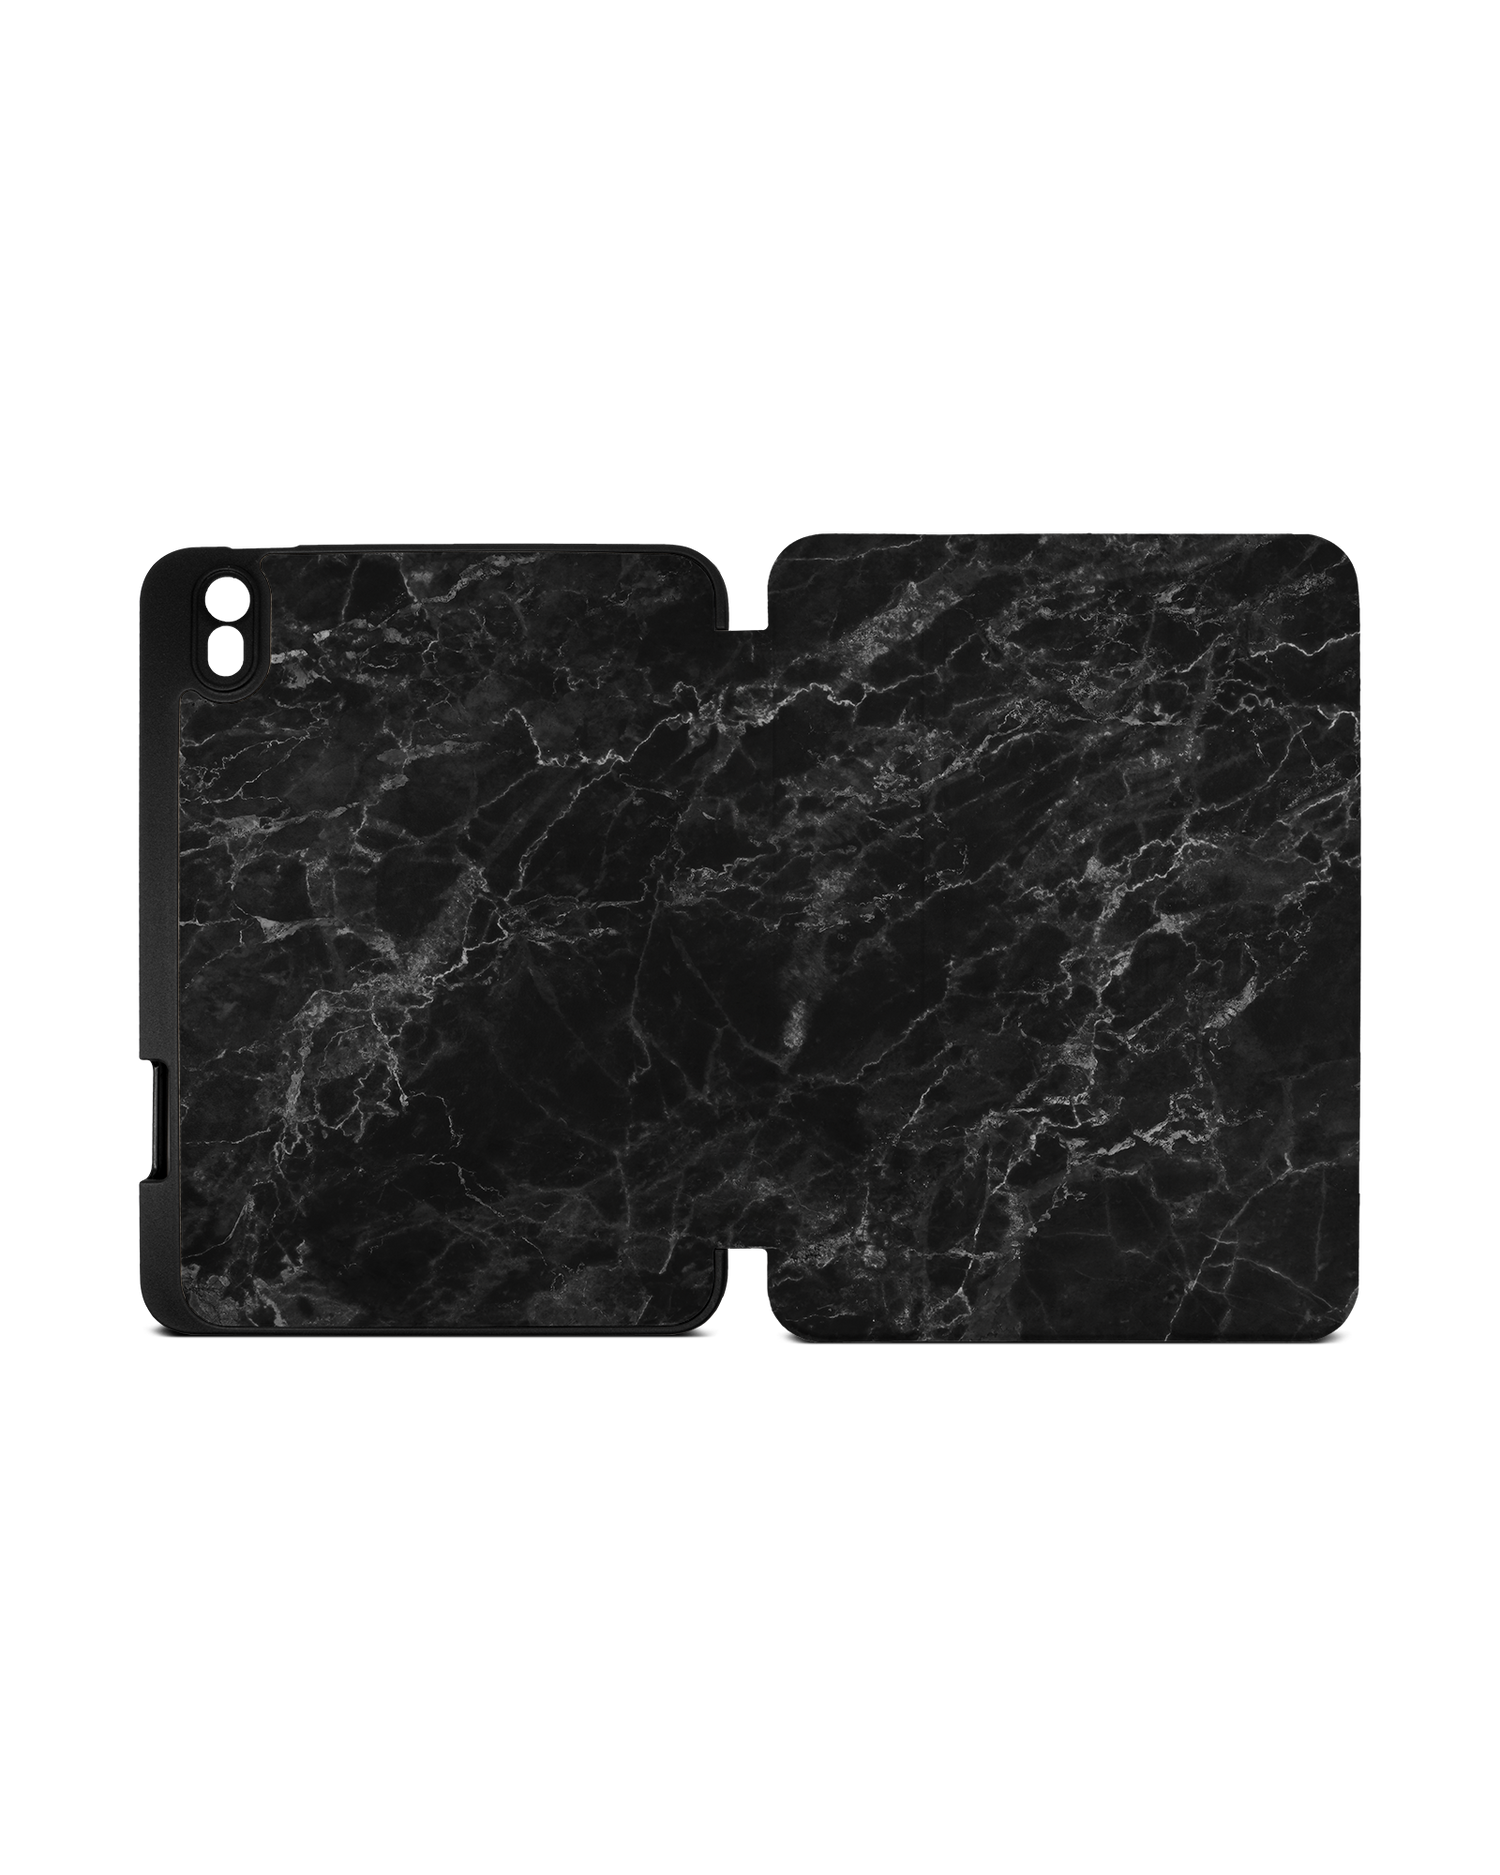 Midnight Marble iPad Case with Pencil Holder Apple iPad mini 6 (2021): Opened exterior view